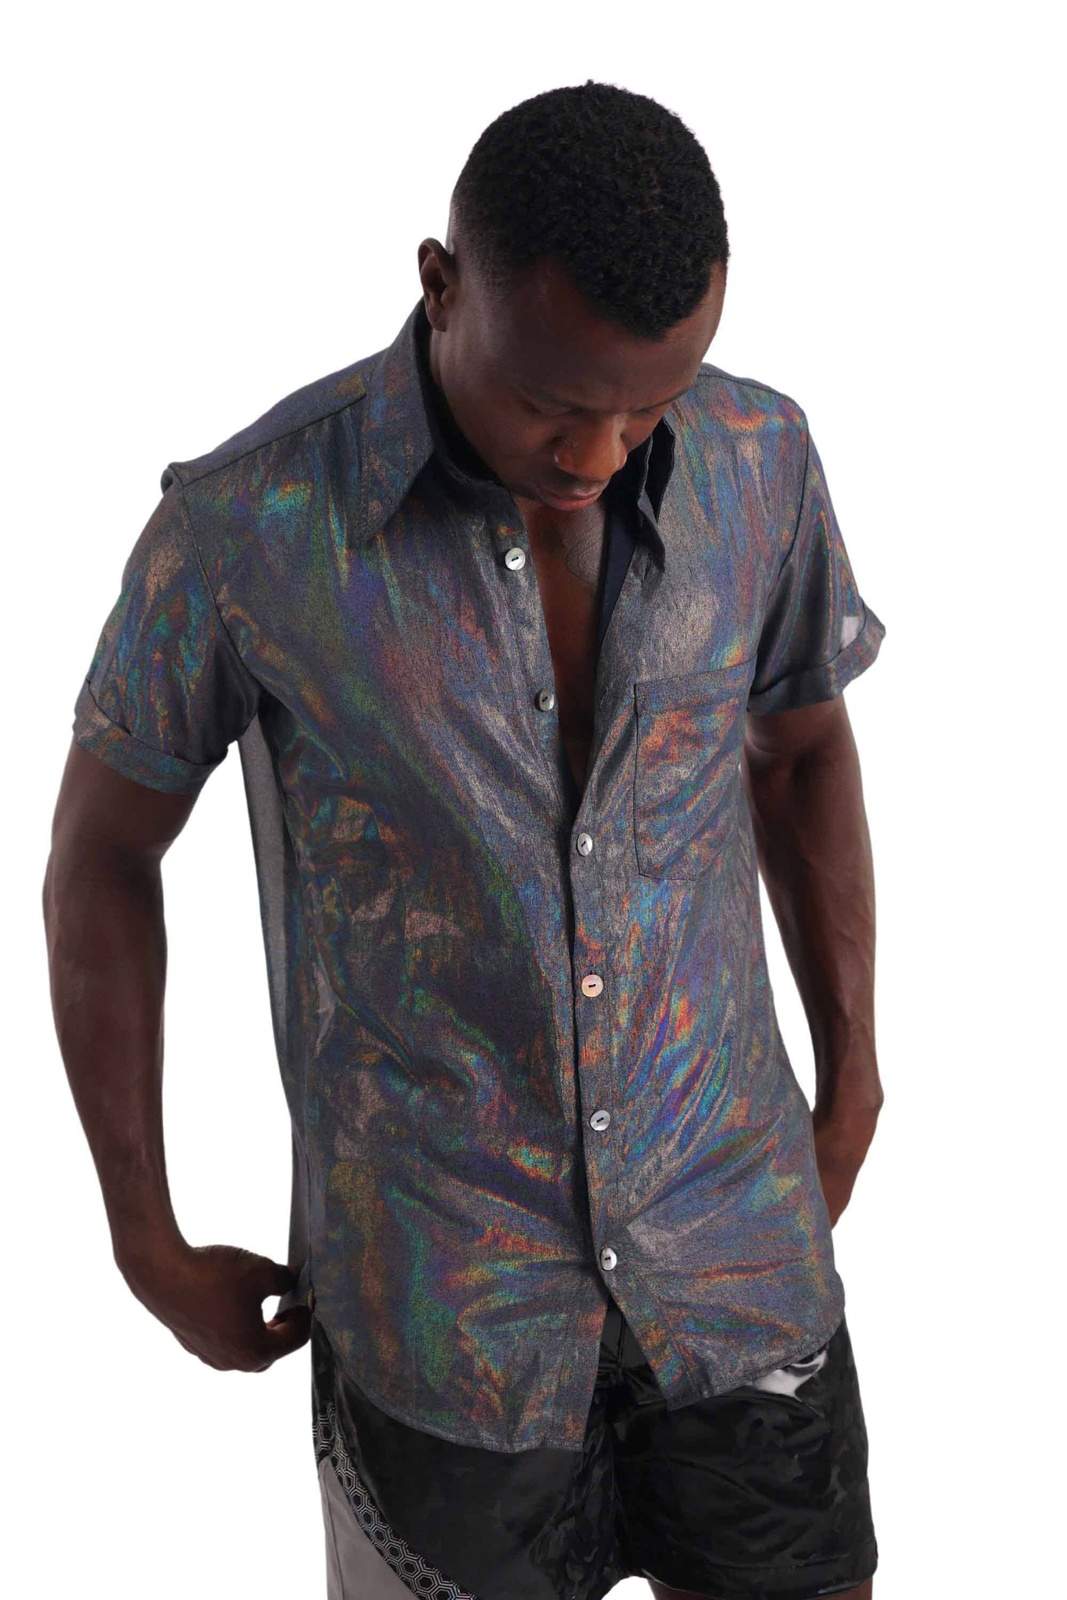 Mens Holographic Leisure Shirt from Love Khaos